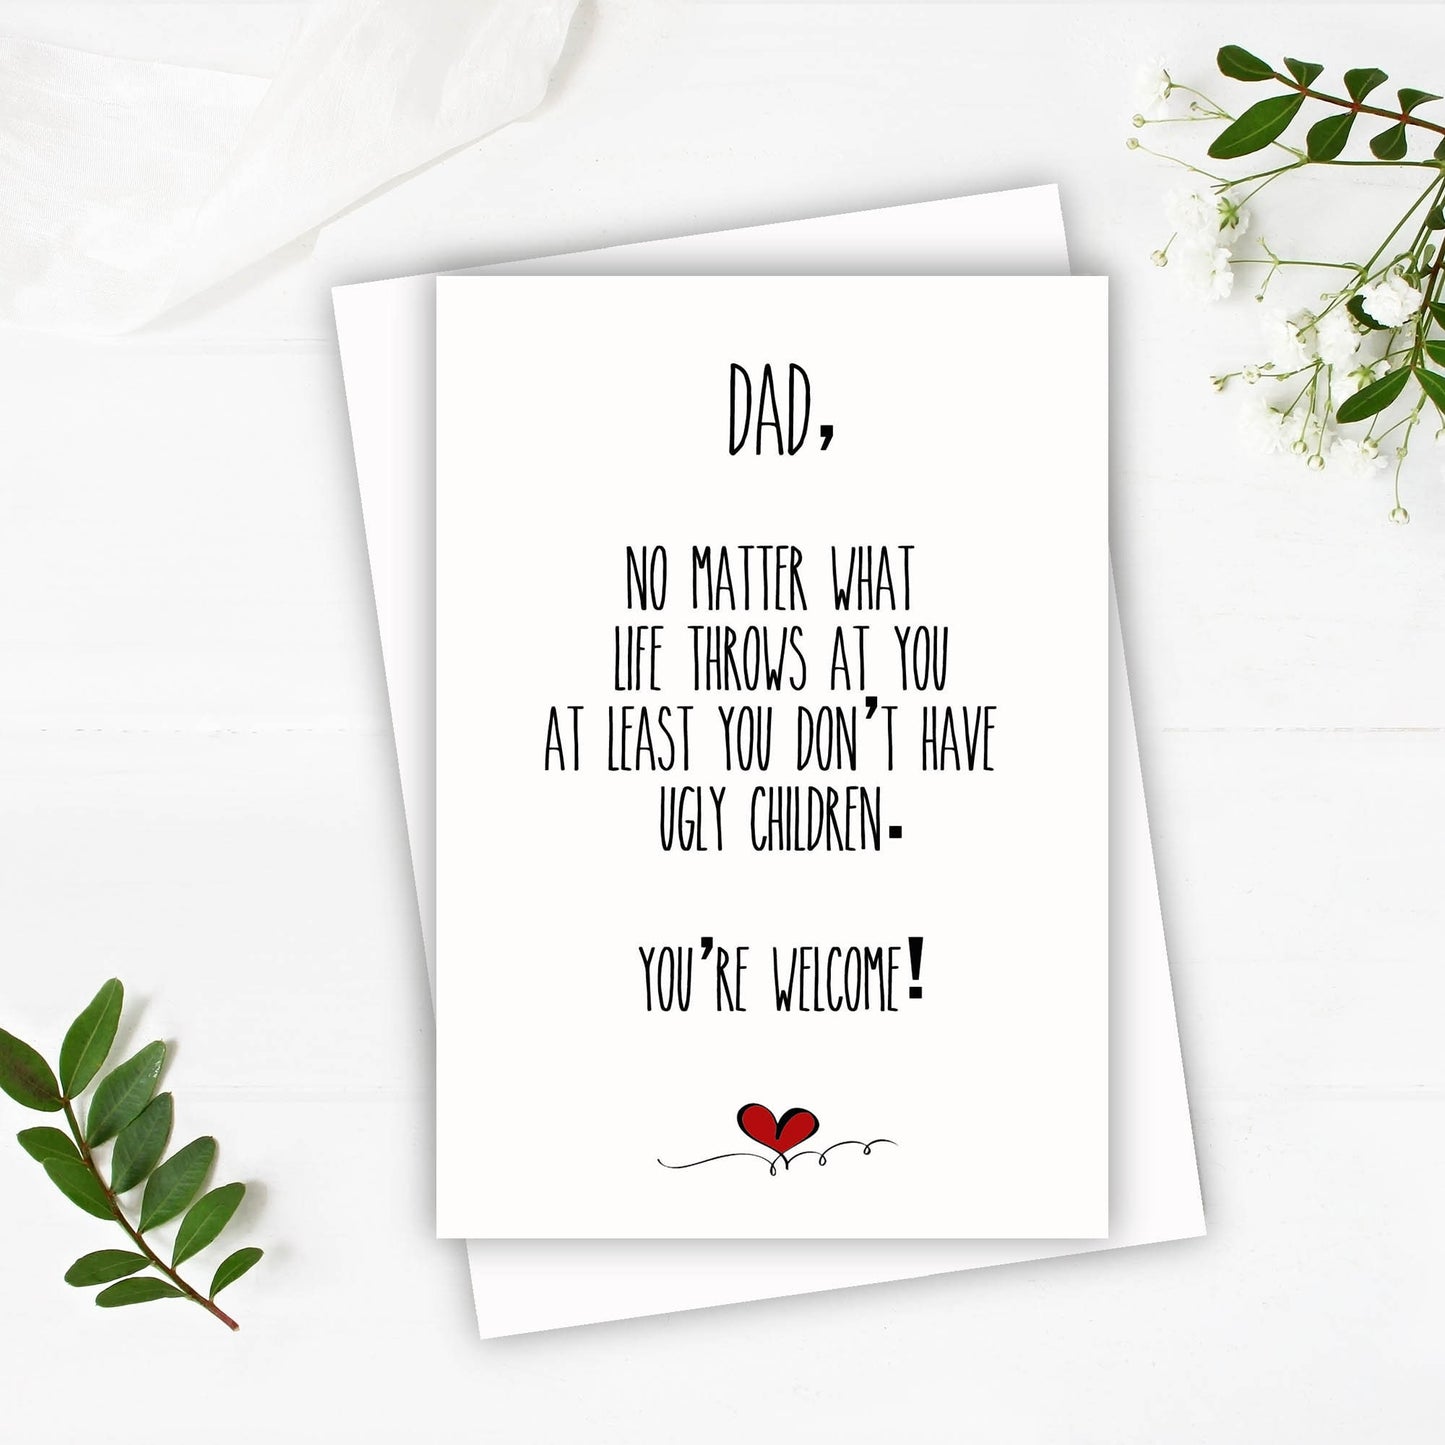 Father's day Card - DAD, You're welcome